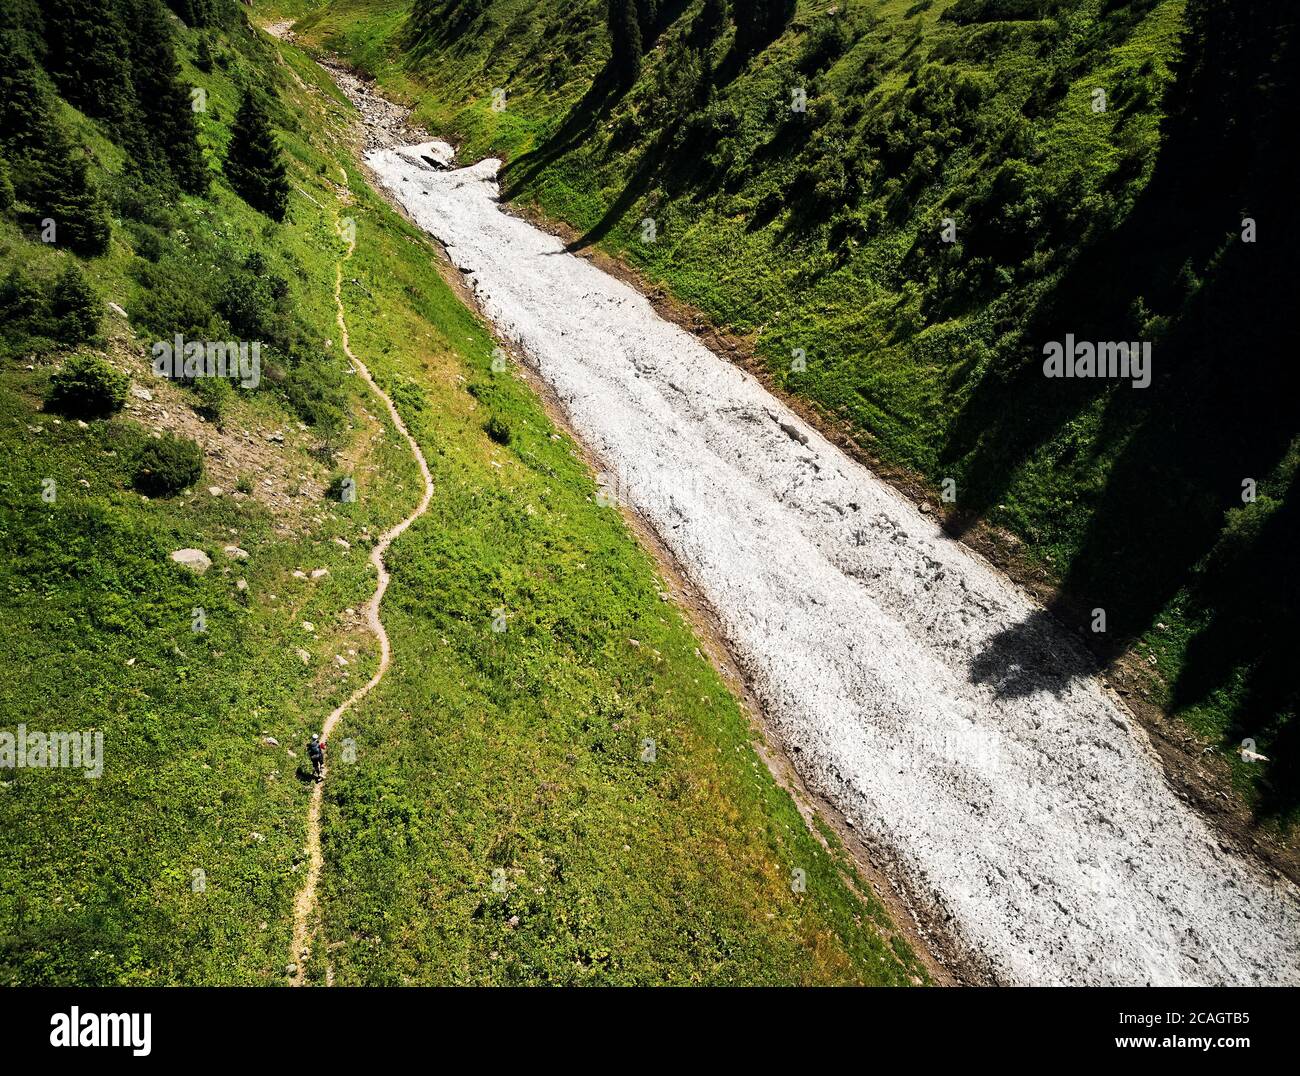 Small man walking near snow glacier in the green mountain valley. Aerial view picture taken by drone. Stock Photo